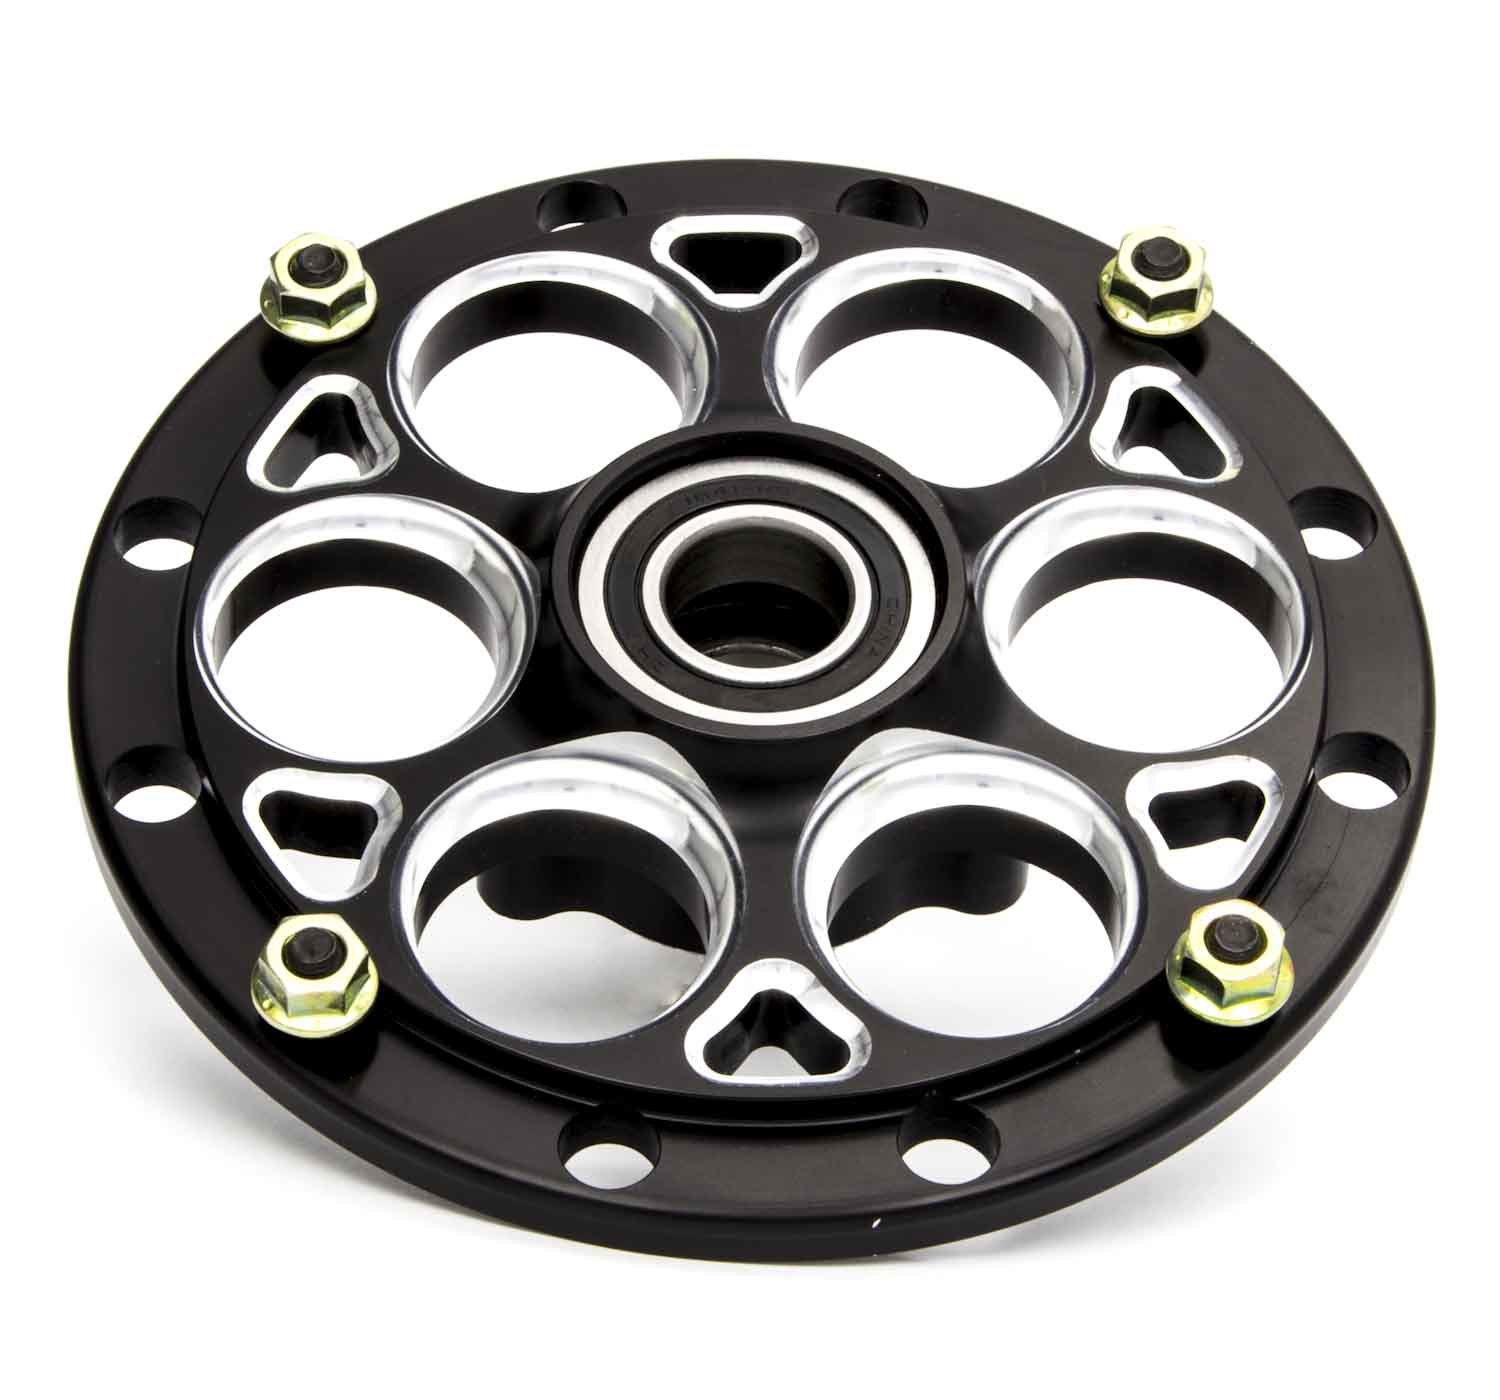 Weld Wheels C8082B-A Wheel Hub, Front, Magnum, 10 in Full Center, 3-Lug Rotor Mount, Aluminum, Black Anodized, 1 in Spindle, Each